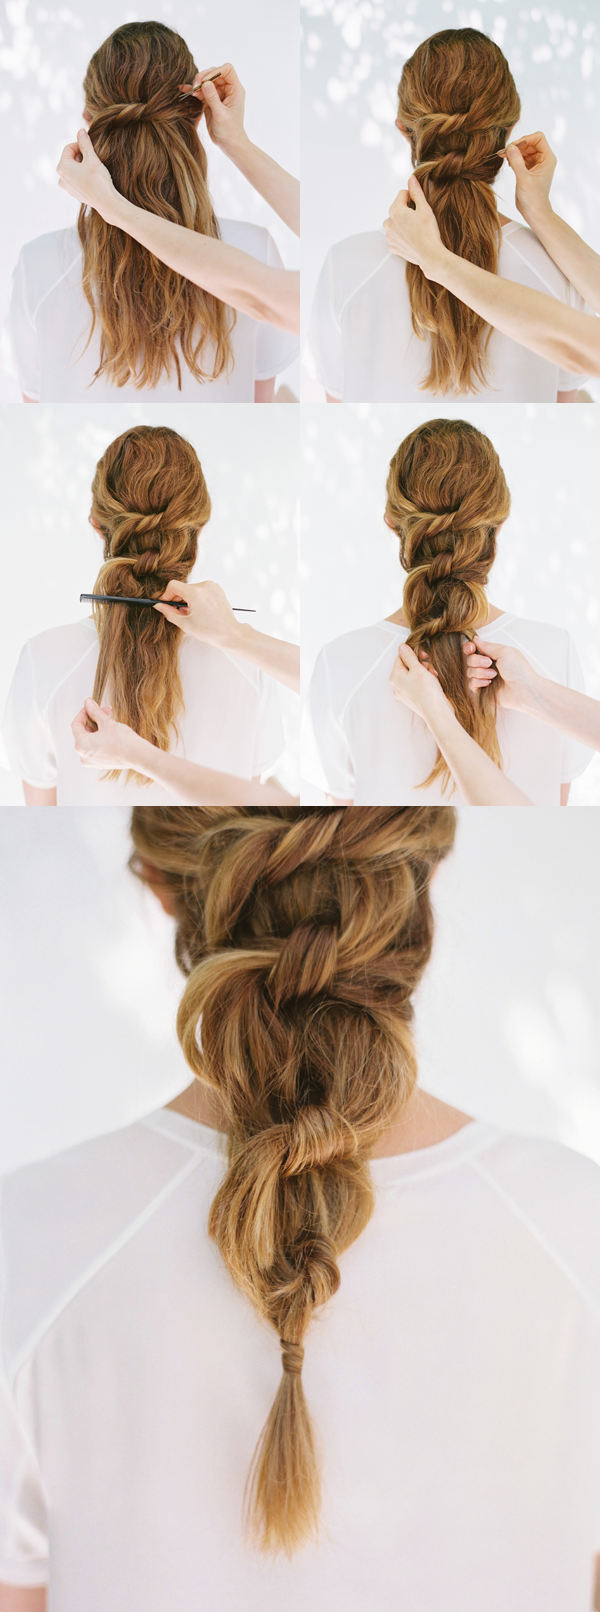 diy-knotted-pony-wedding-hairstyles-for-long-hair